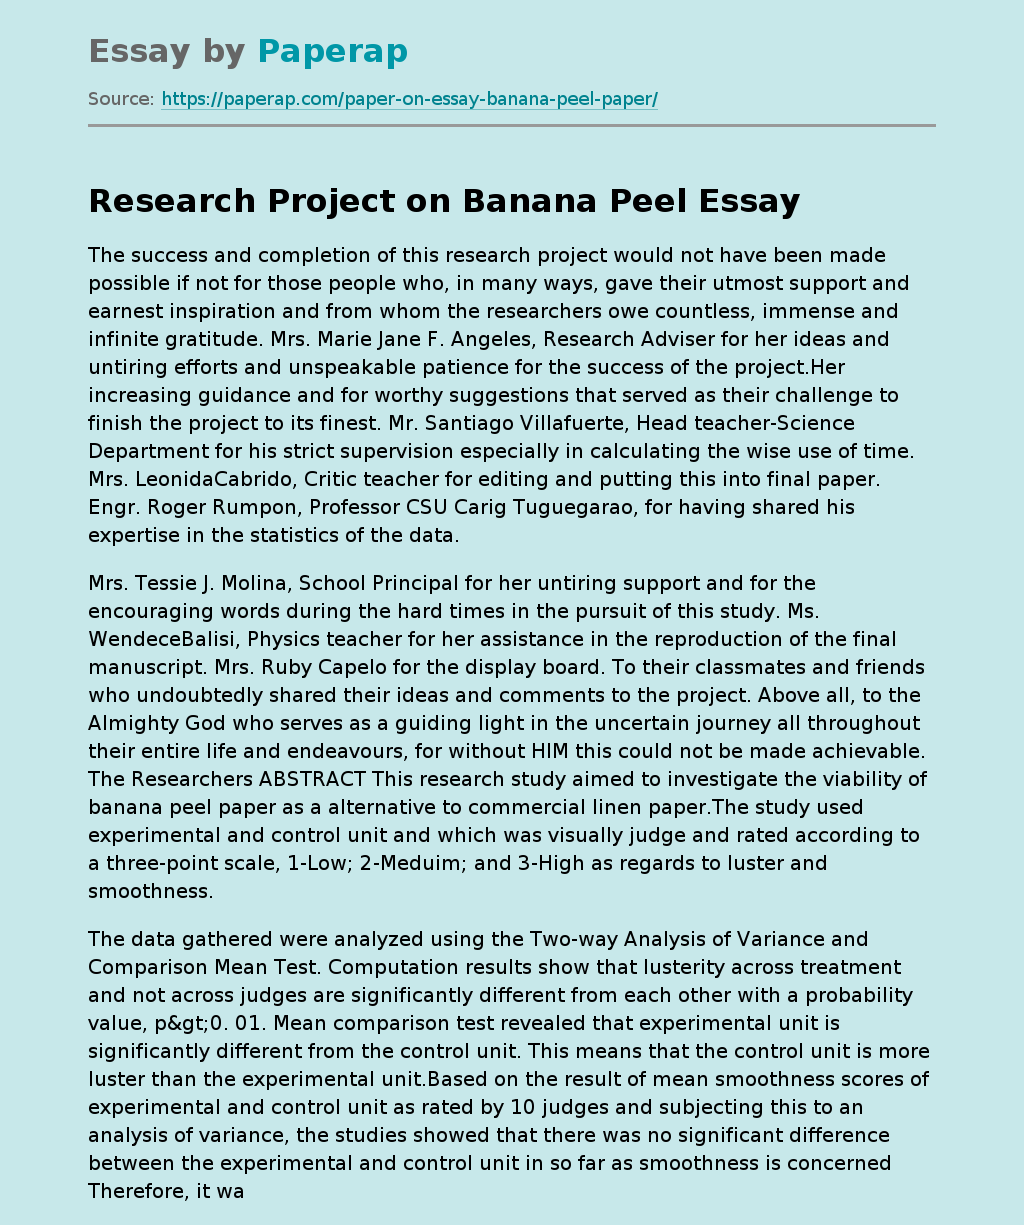 Research Project on Banana Peel